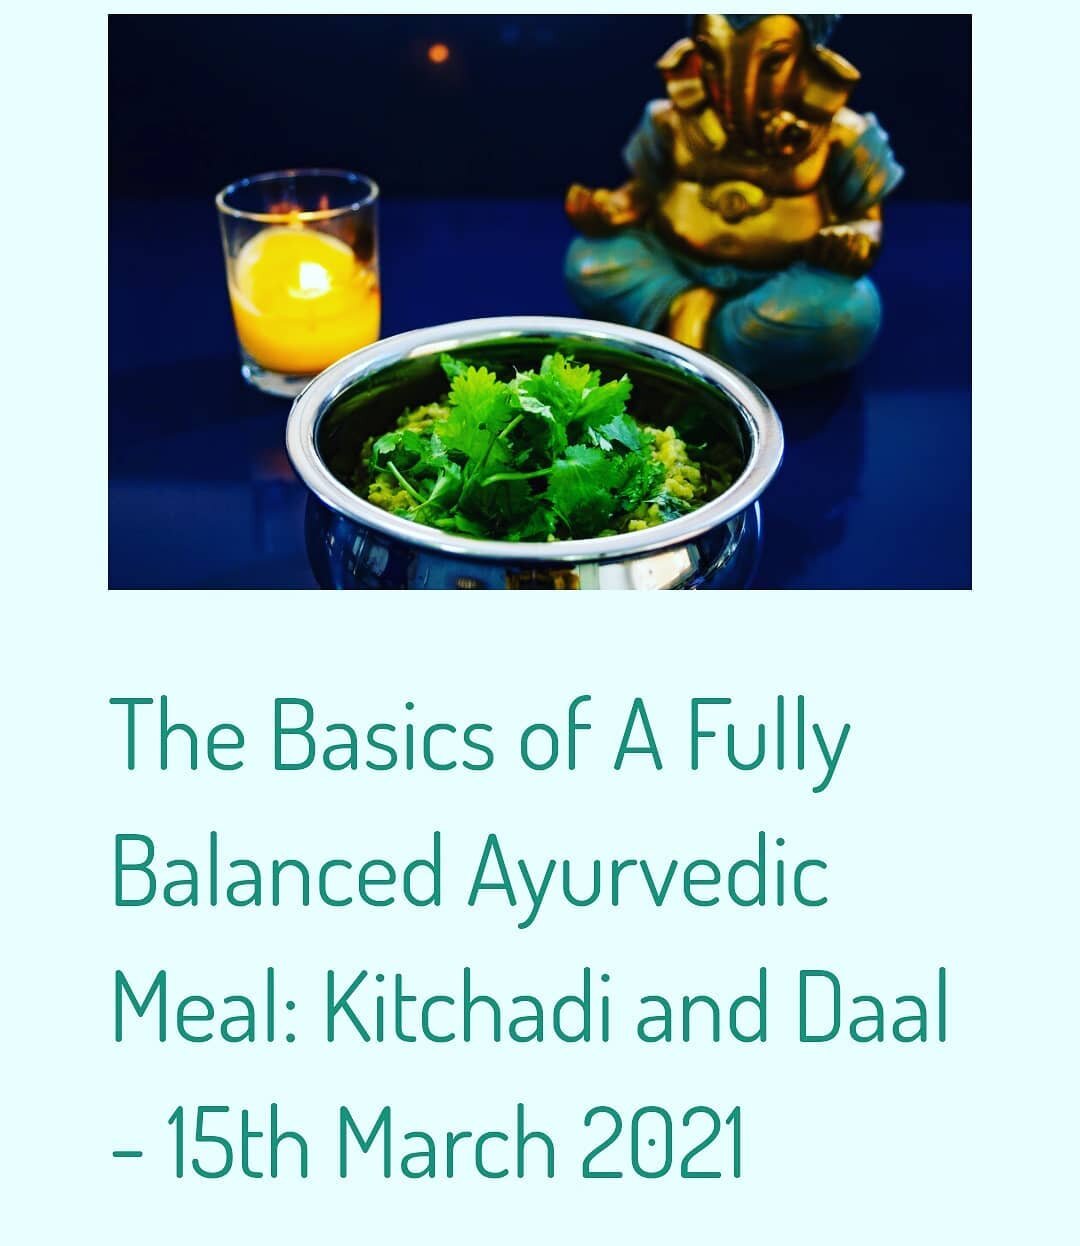 New #onlinecookingclass on 15th of March! 💻🥰🍯
The basics of a fully balanced #ayurvedic meal: #kitchadi and #daal
A wonderful way to reboot the #immunesystem and to allow more energy to flow.
Book your class on my website: nimitascuisine.com
#ayur